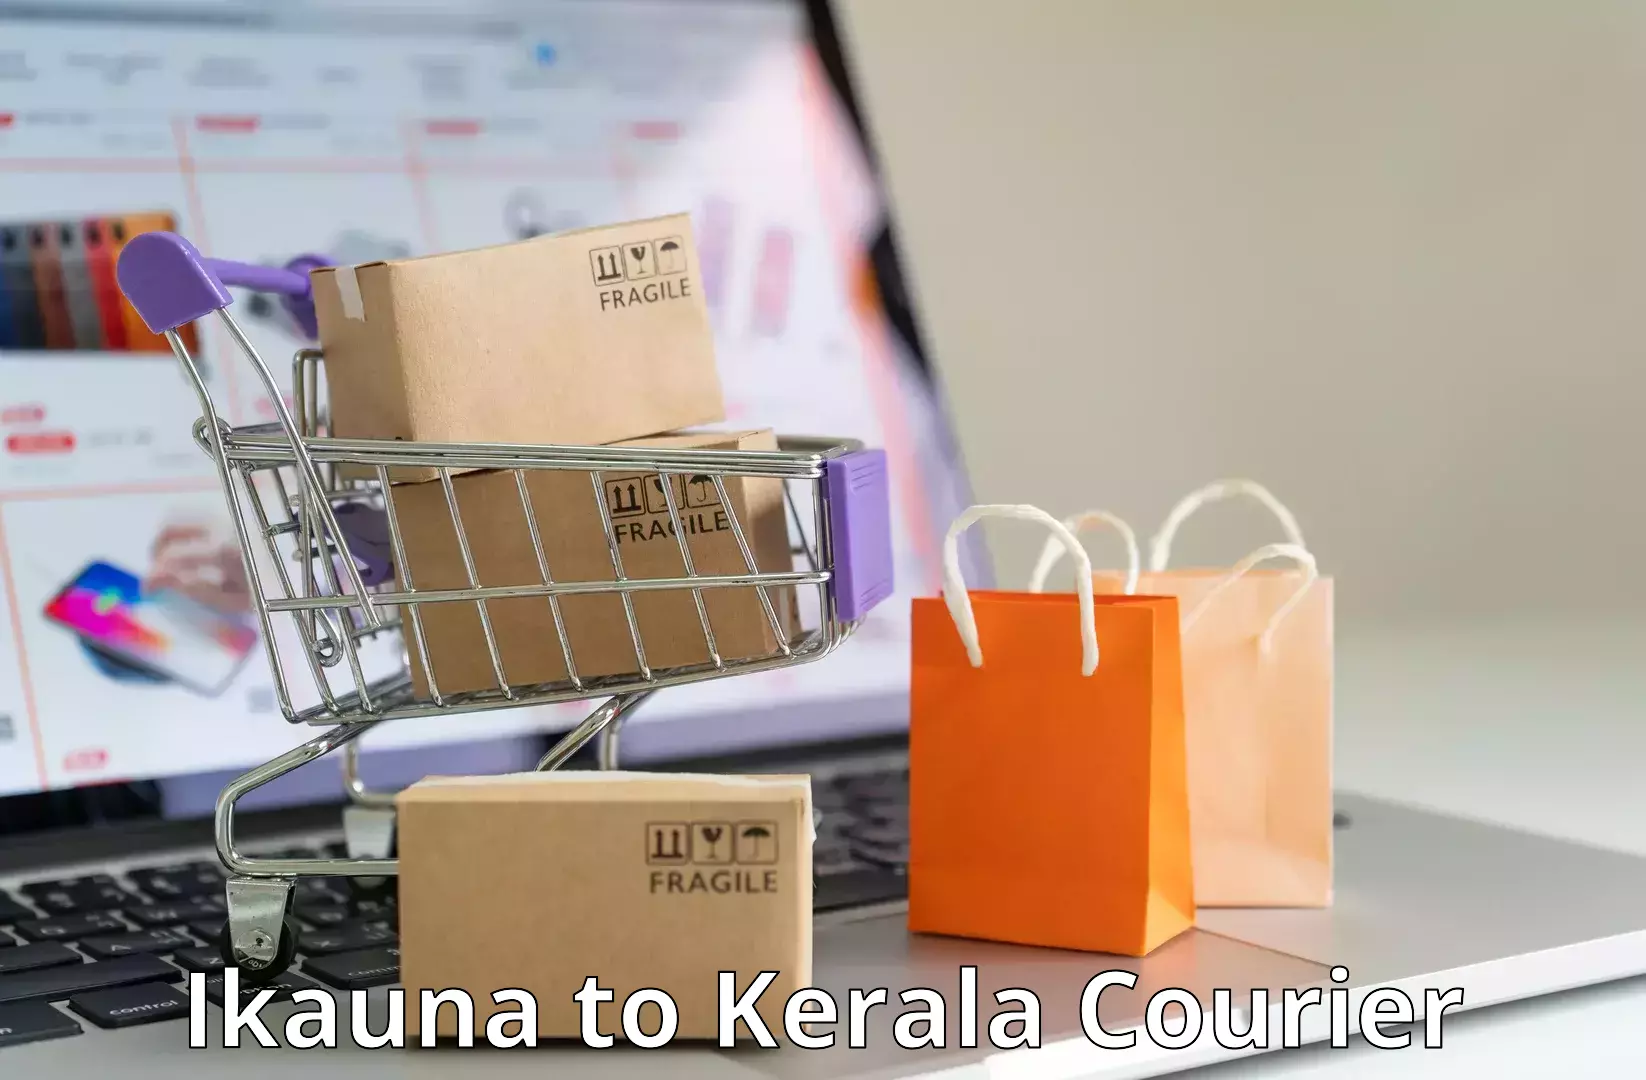 Large-scale shipping solutions Ikauna to Kerala